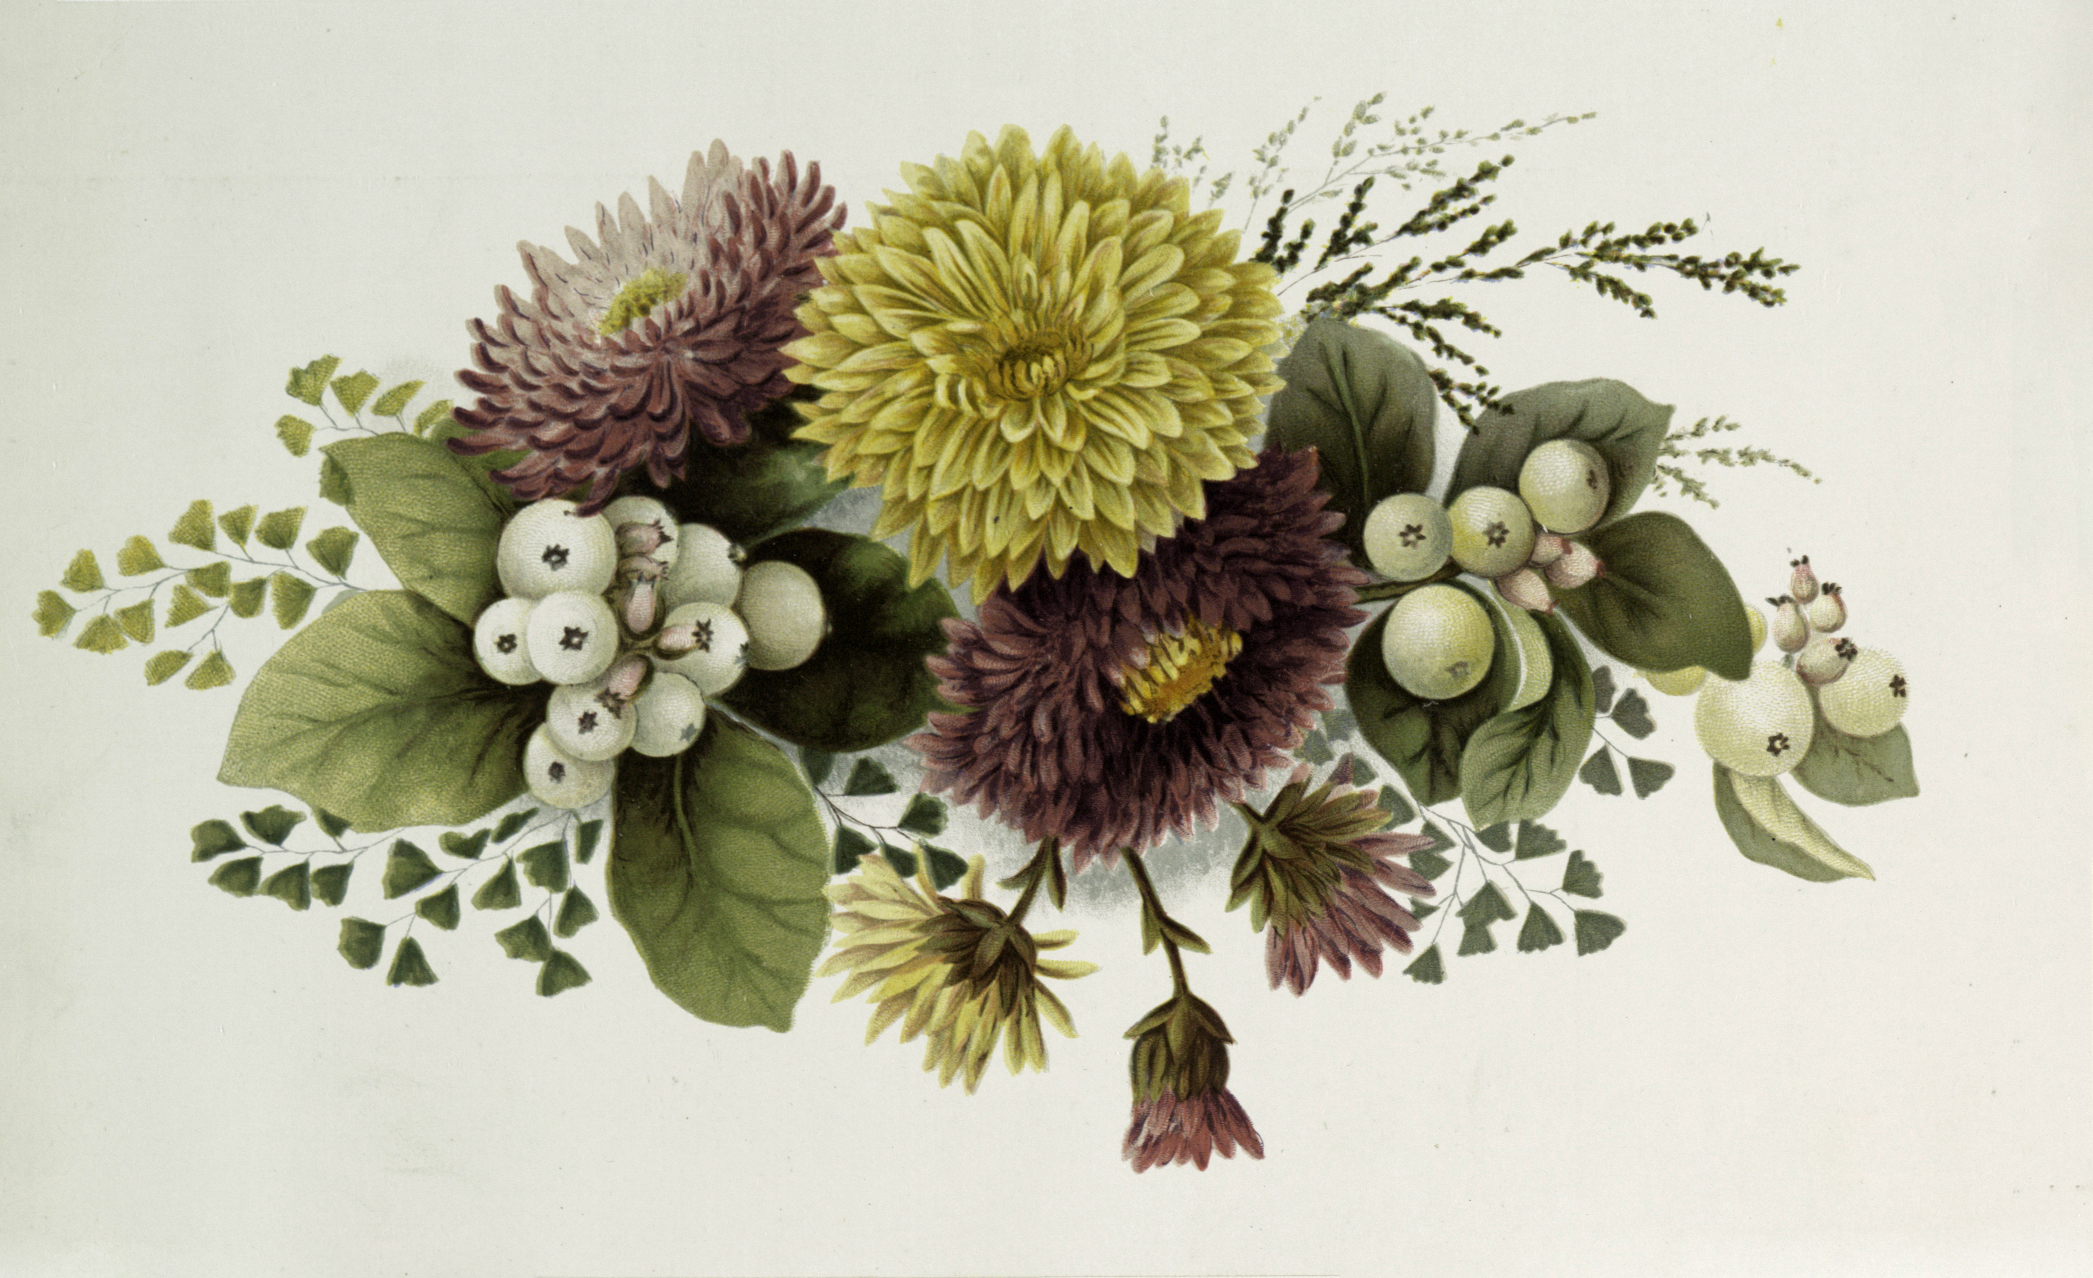 7 Chrysanthemums Images - Vintage Mums! - The Graphics Fairy